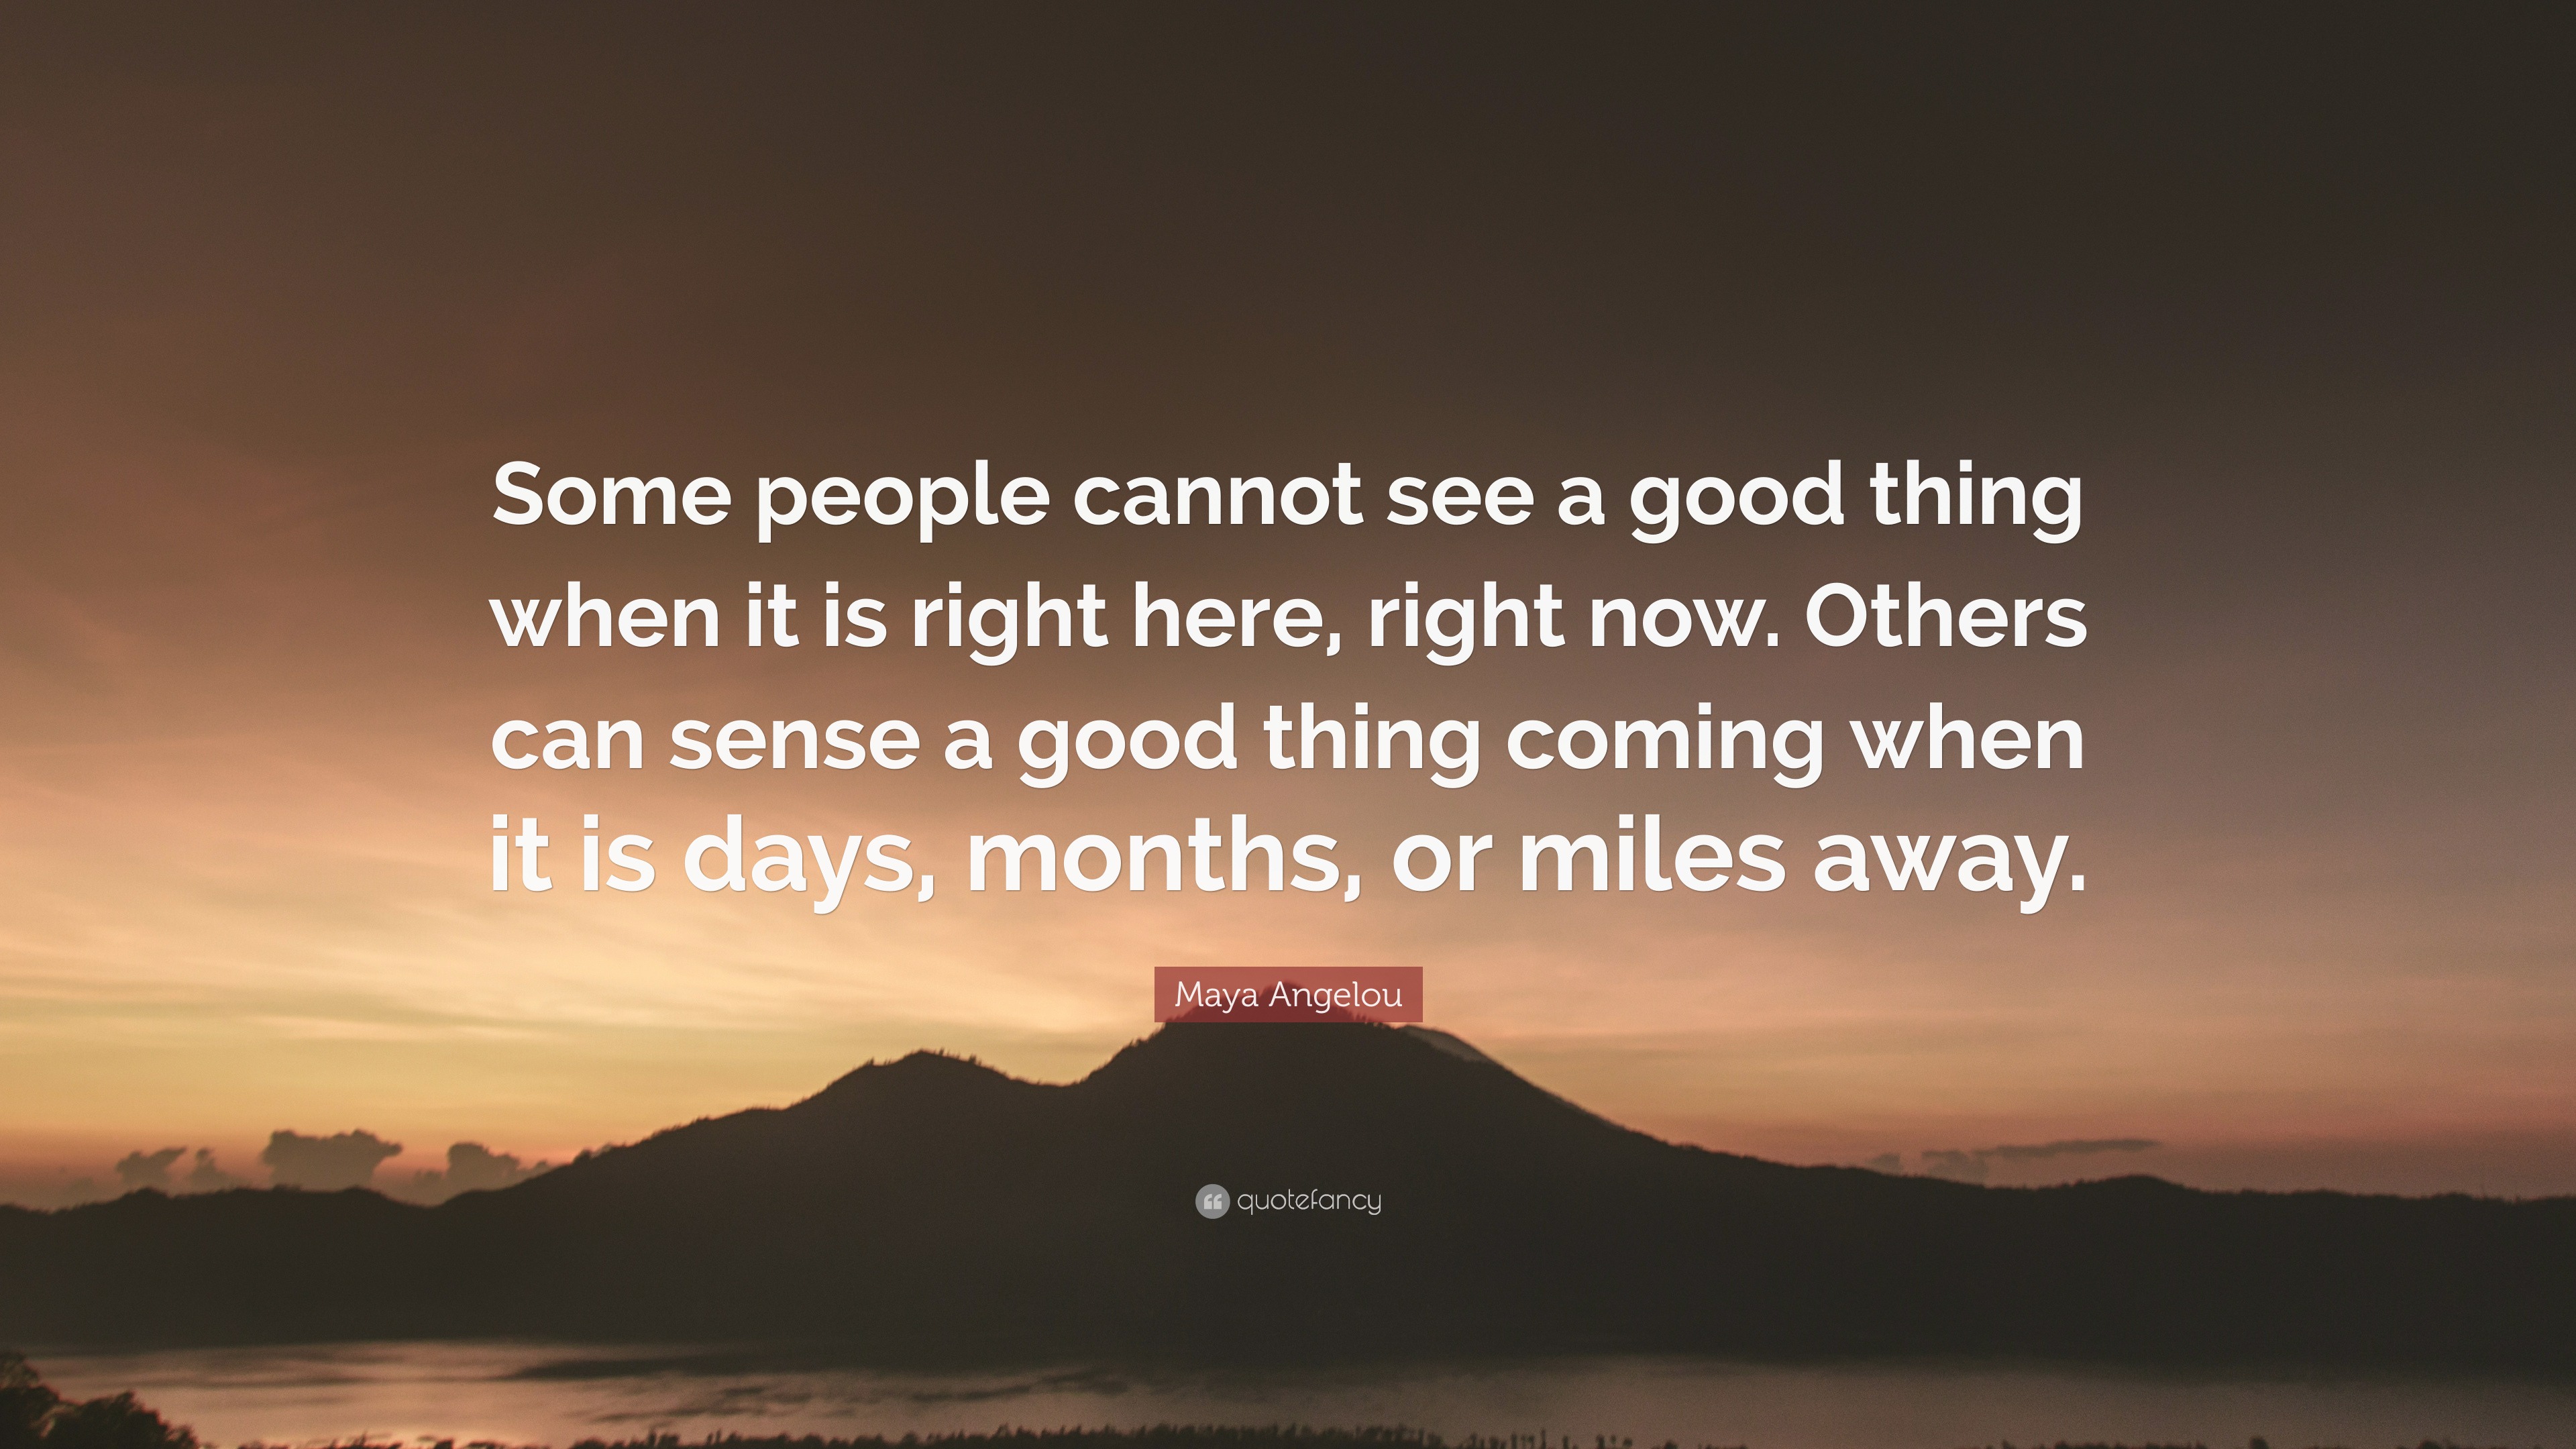 Maya Angelou Quote: “Some people cannot see a good thing when it is right  here, right now. Others can sense a good thing coming when it is da...”